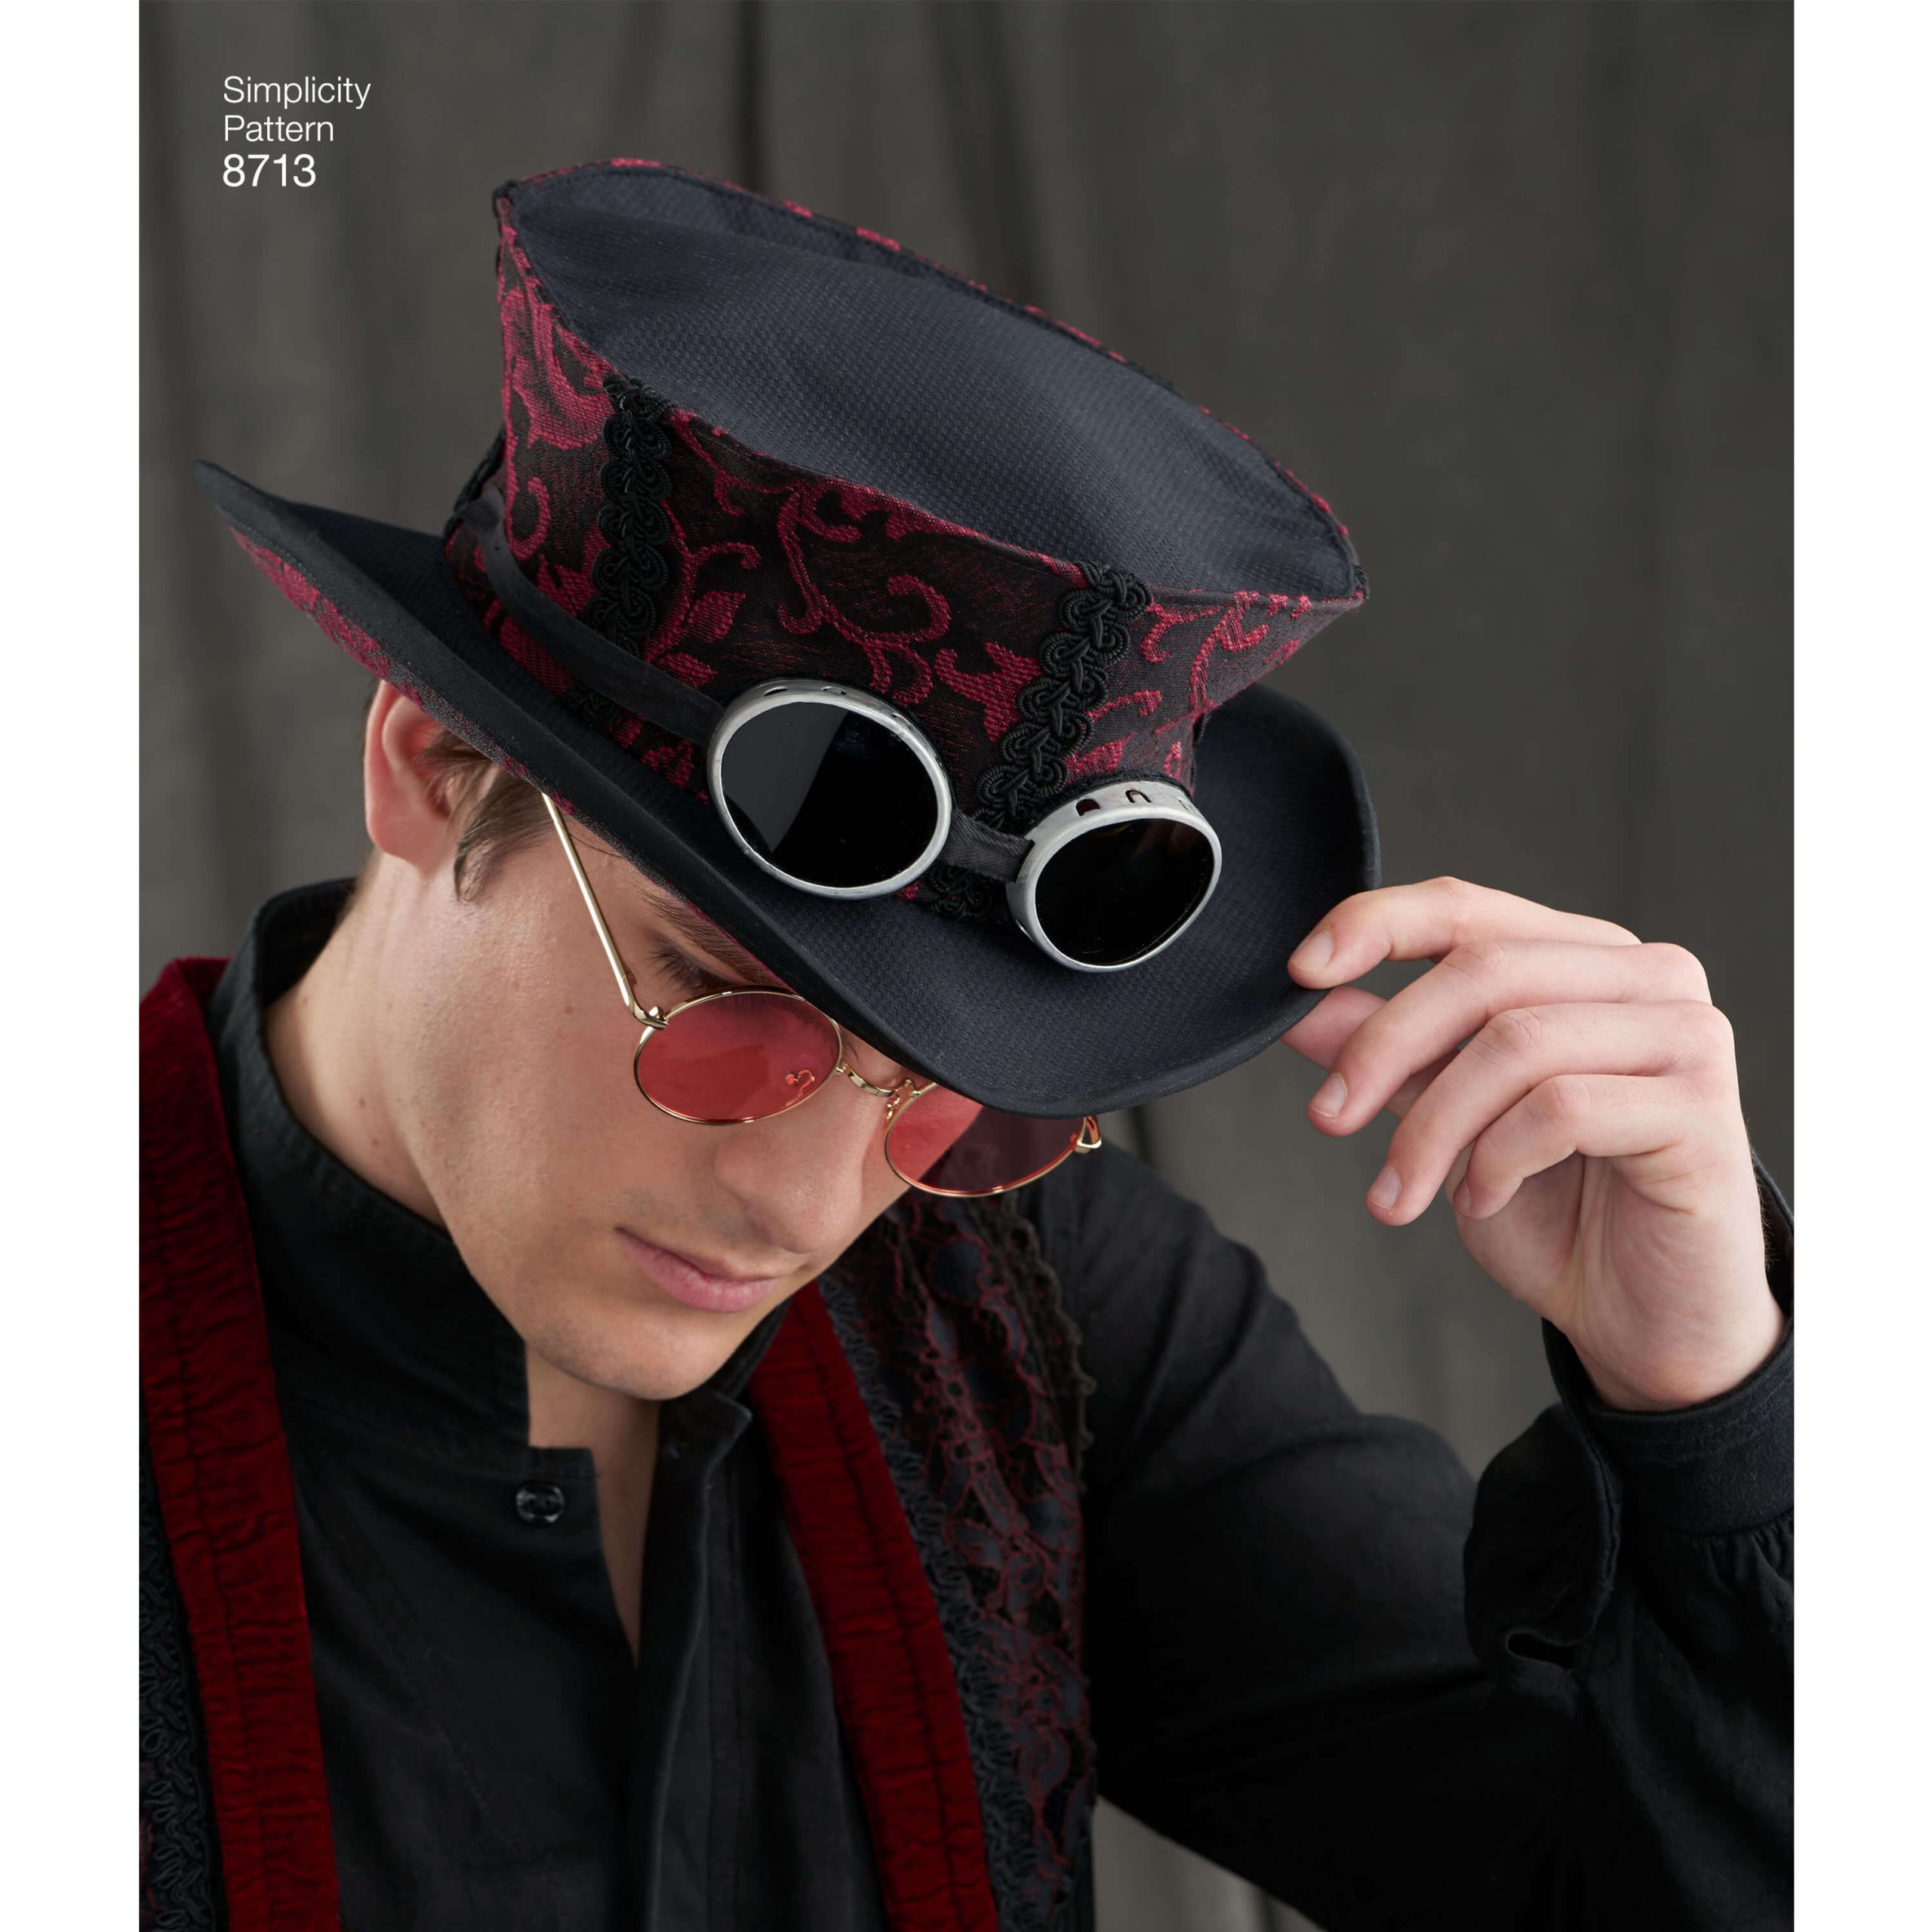 Simplicity Sewing Pattern 8713 Men's Hats in Three Sizes - Sewdirect